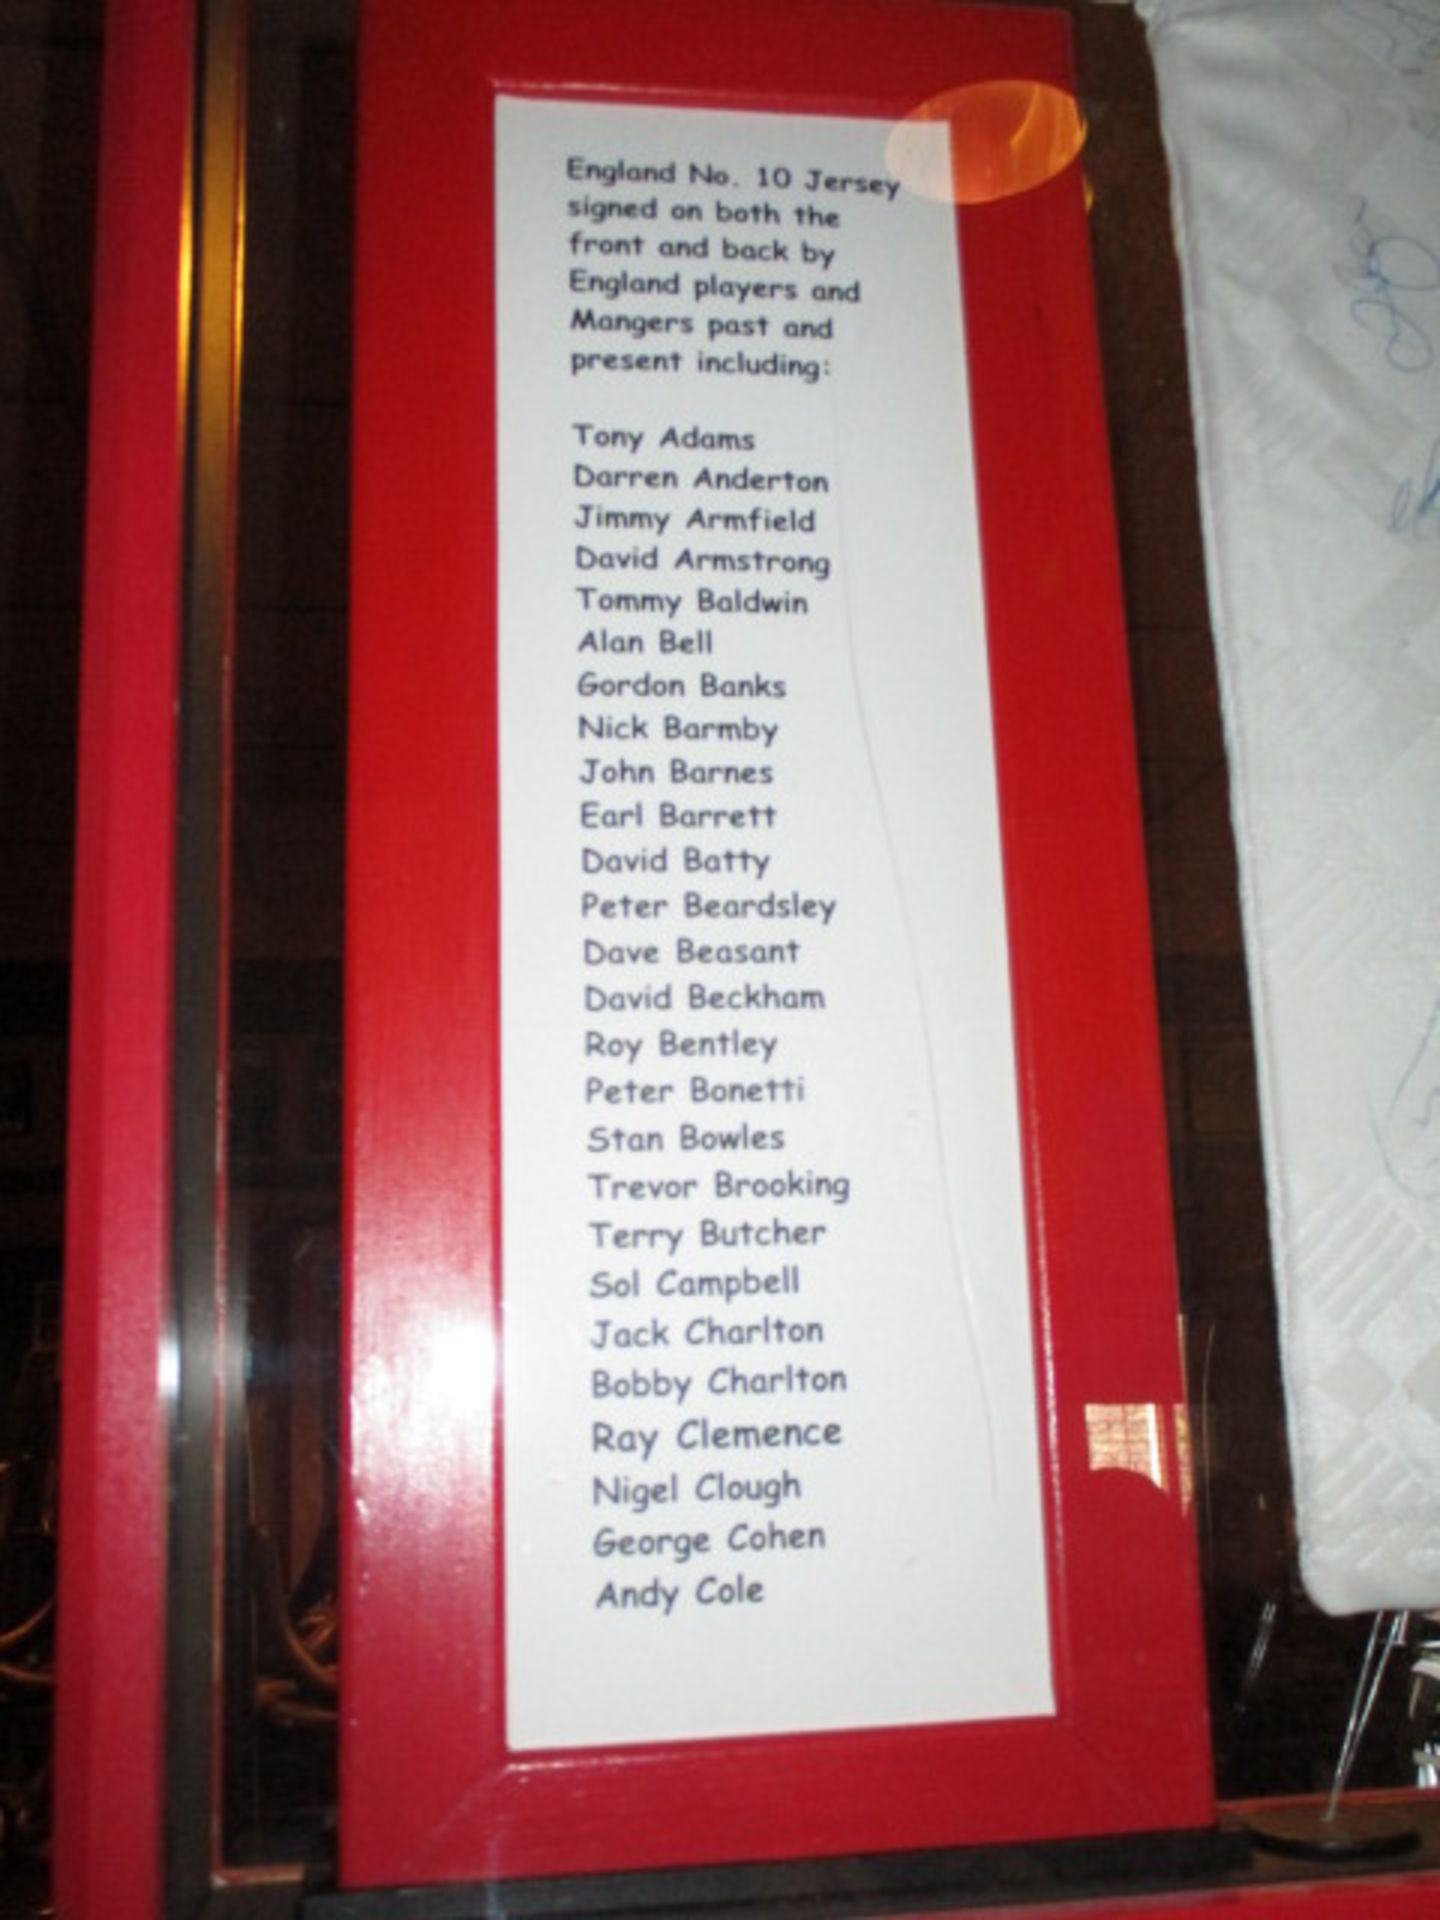 England number 10 shirt signed by numerous England players and managers -2 sided - 118 signatures in - Image 3 of 4